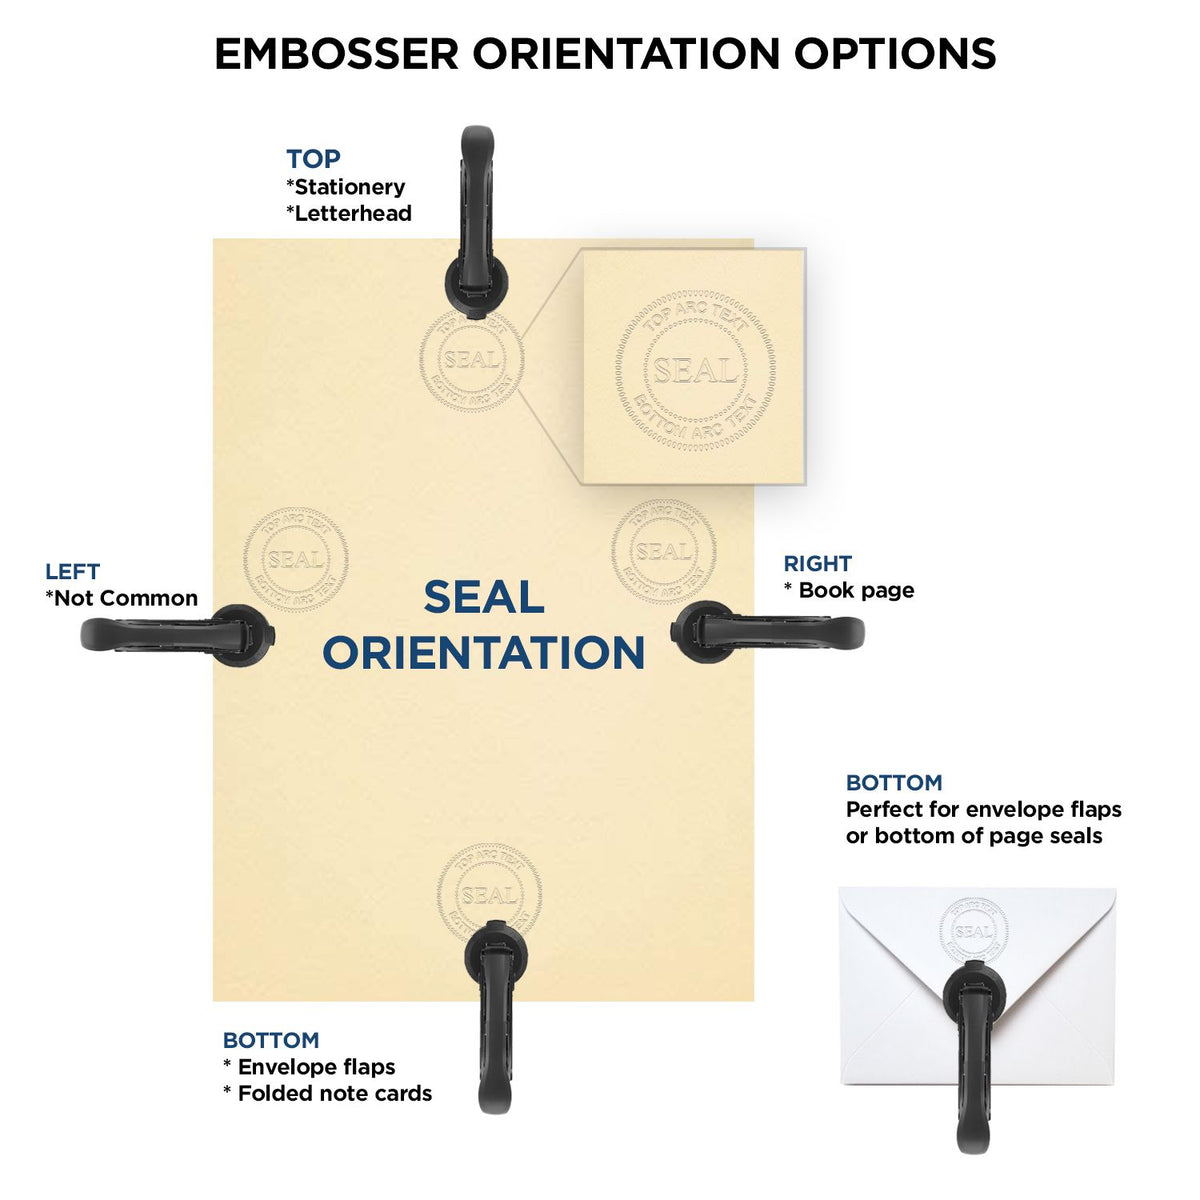 An infographic for the Gift Florida Land Surveyor Seal showing embosser orientation, this is showing examples of a top, bottom, right and left insert.